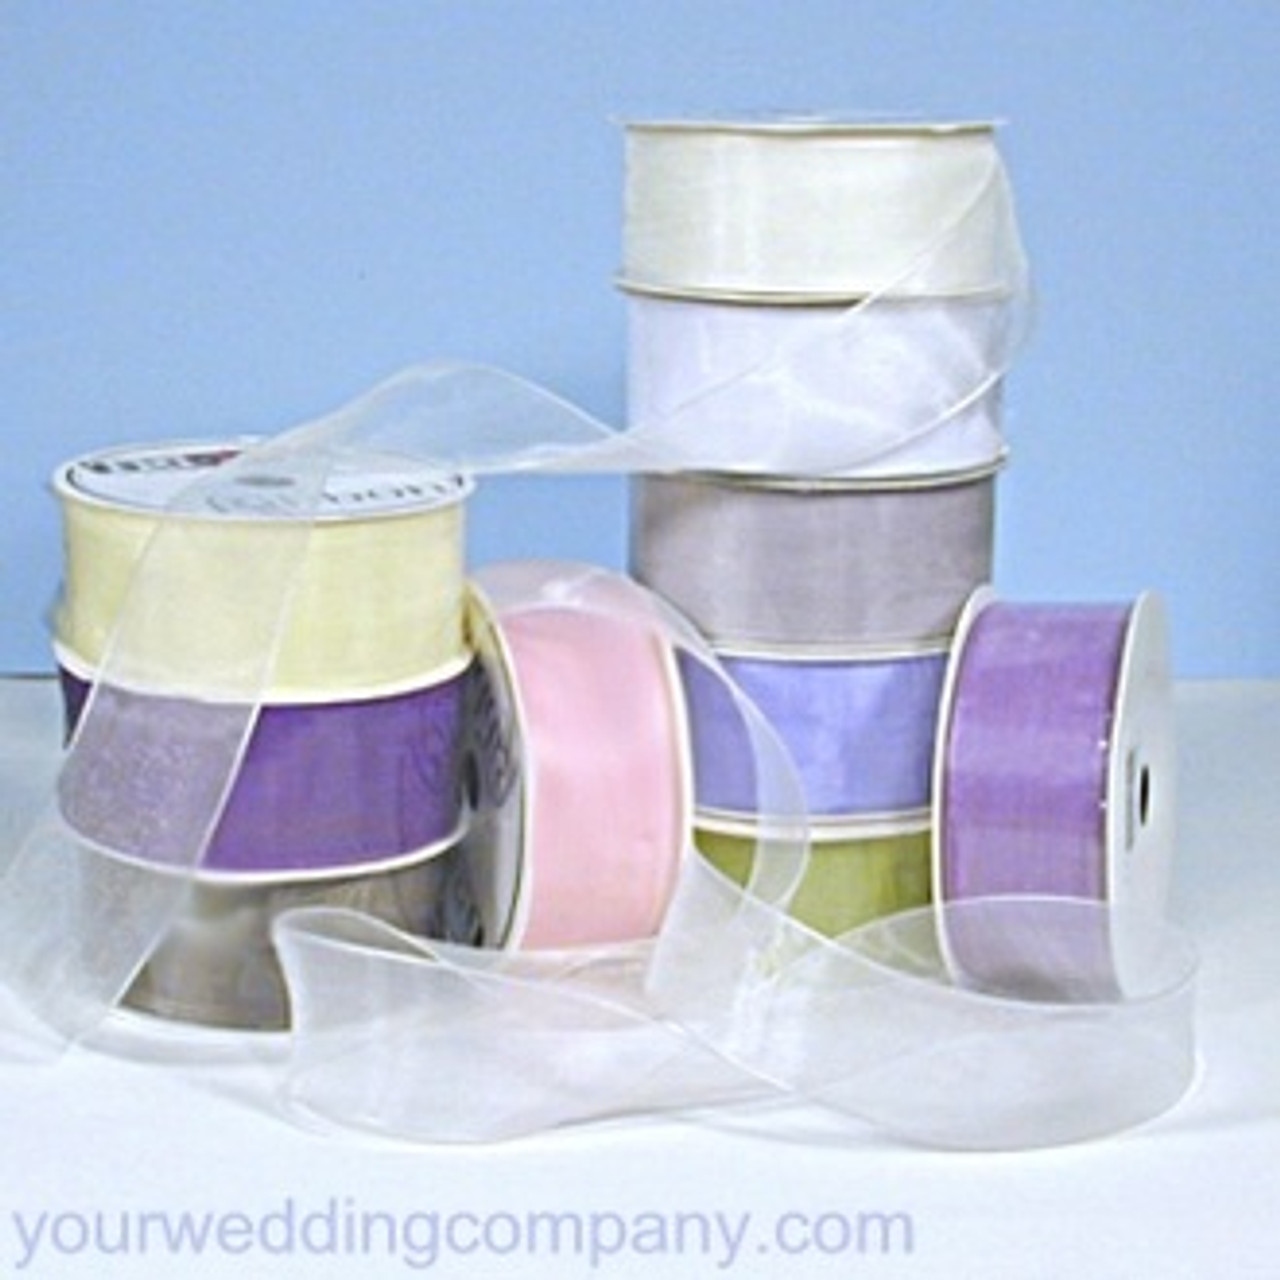 6 x 25 Yards Wide Sheer Organza Ribbon Fabric Roll Turquoise